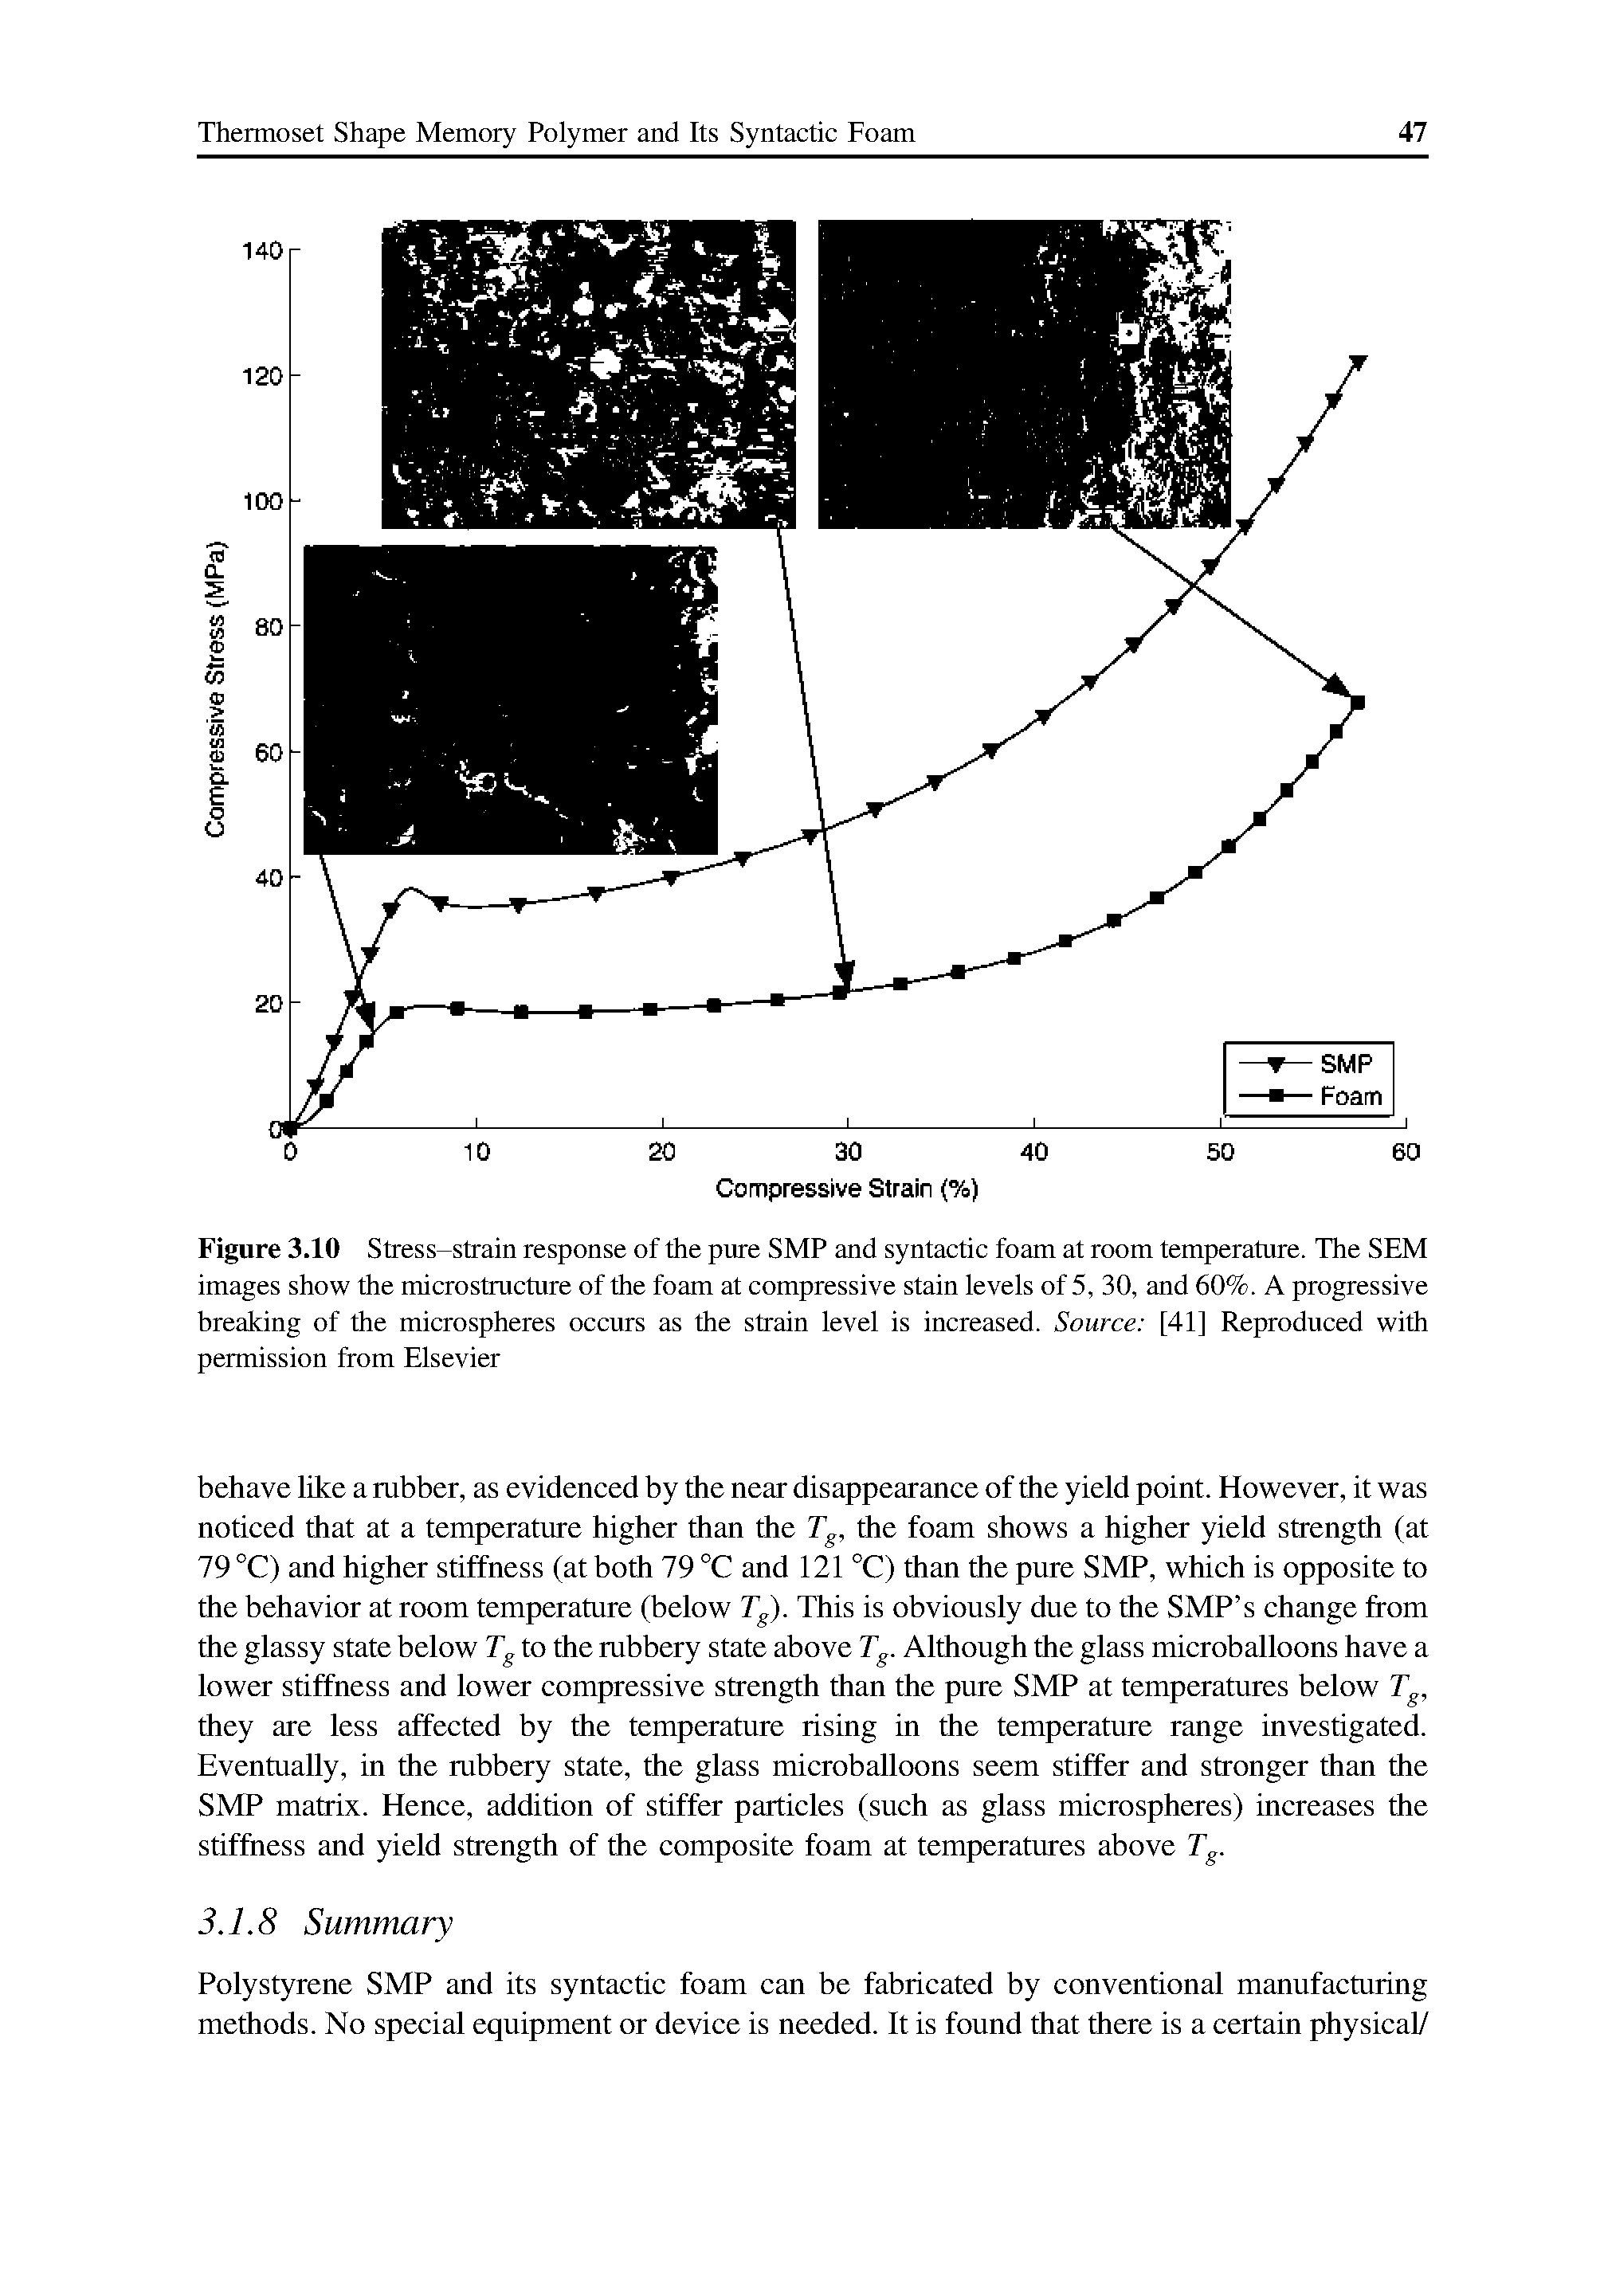 Figure 3.10 Stress-strain response of the pure SMP and syntactic foam at room temperature. The SEM images show the microstructure of the foam at compressive stain levels of 5, 30, and 60%. A progressive breaking of the microspheres occurs as the strain level is increased. Source [41] Reproduced with permission from Elsevier...